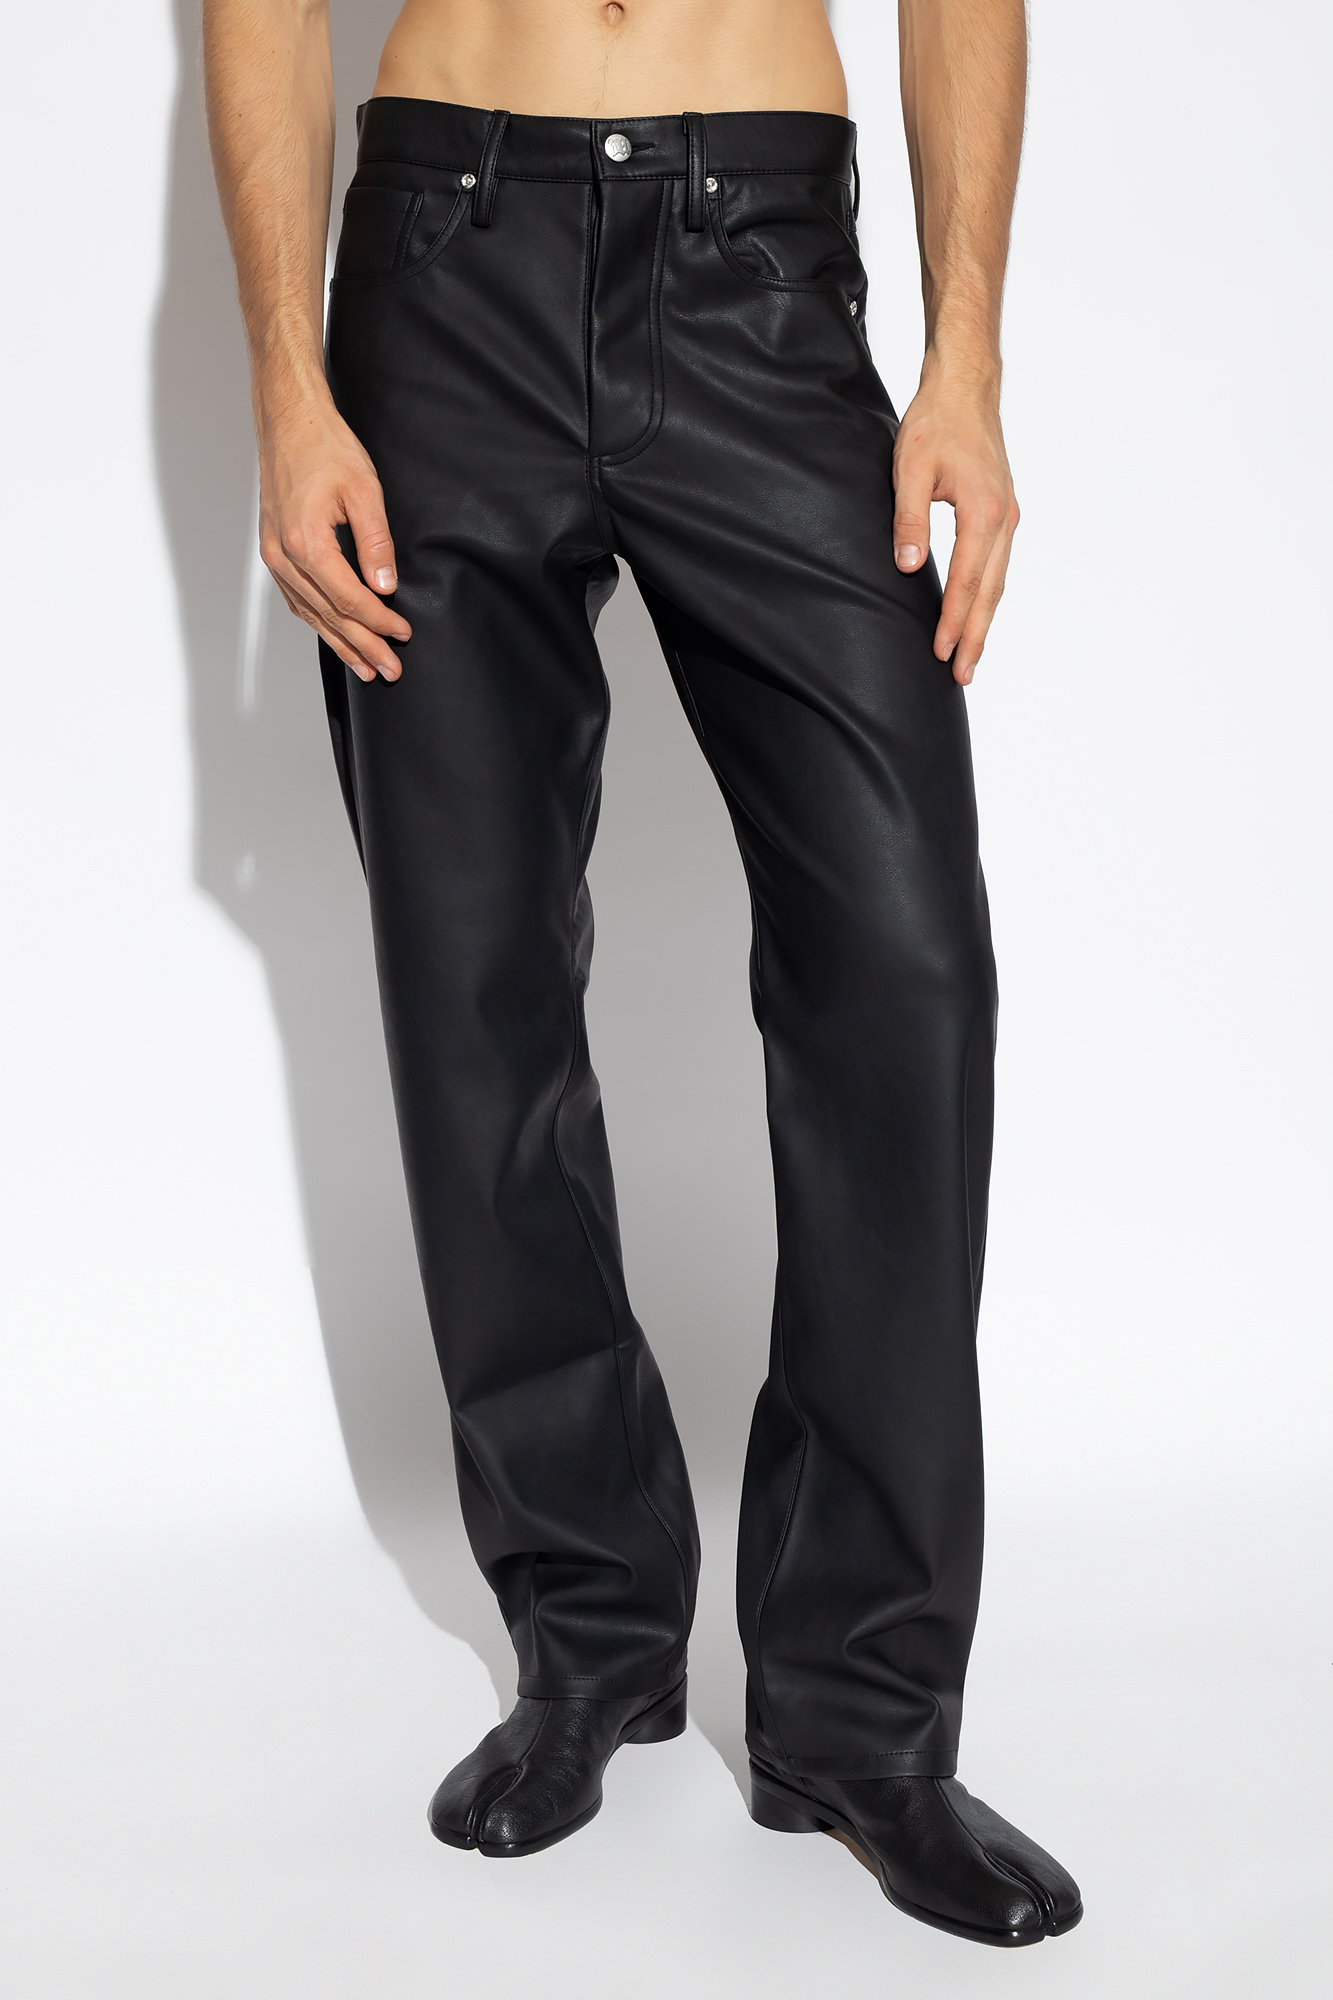 MISBHV ‘Inside A Dark Echo’ collection trousers